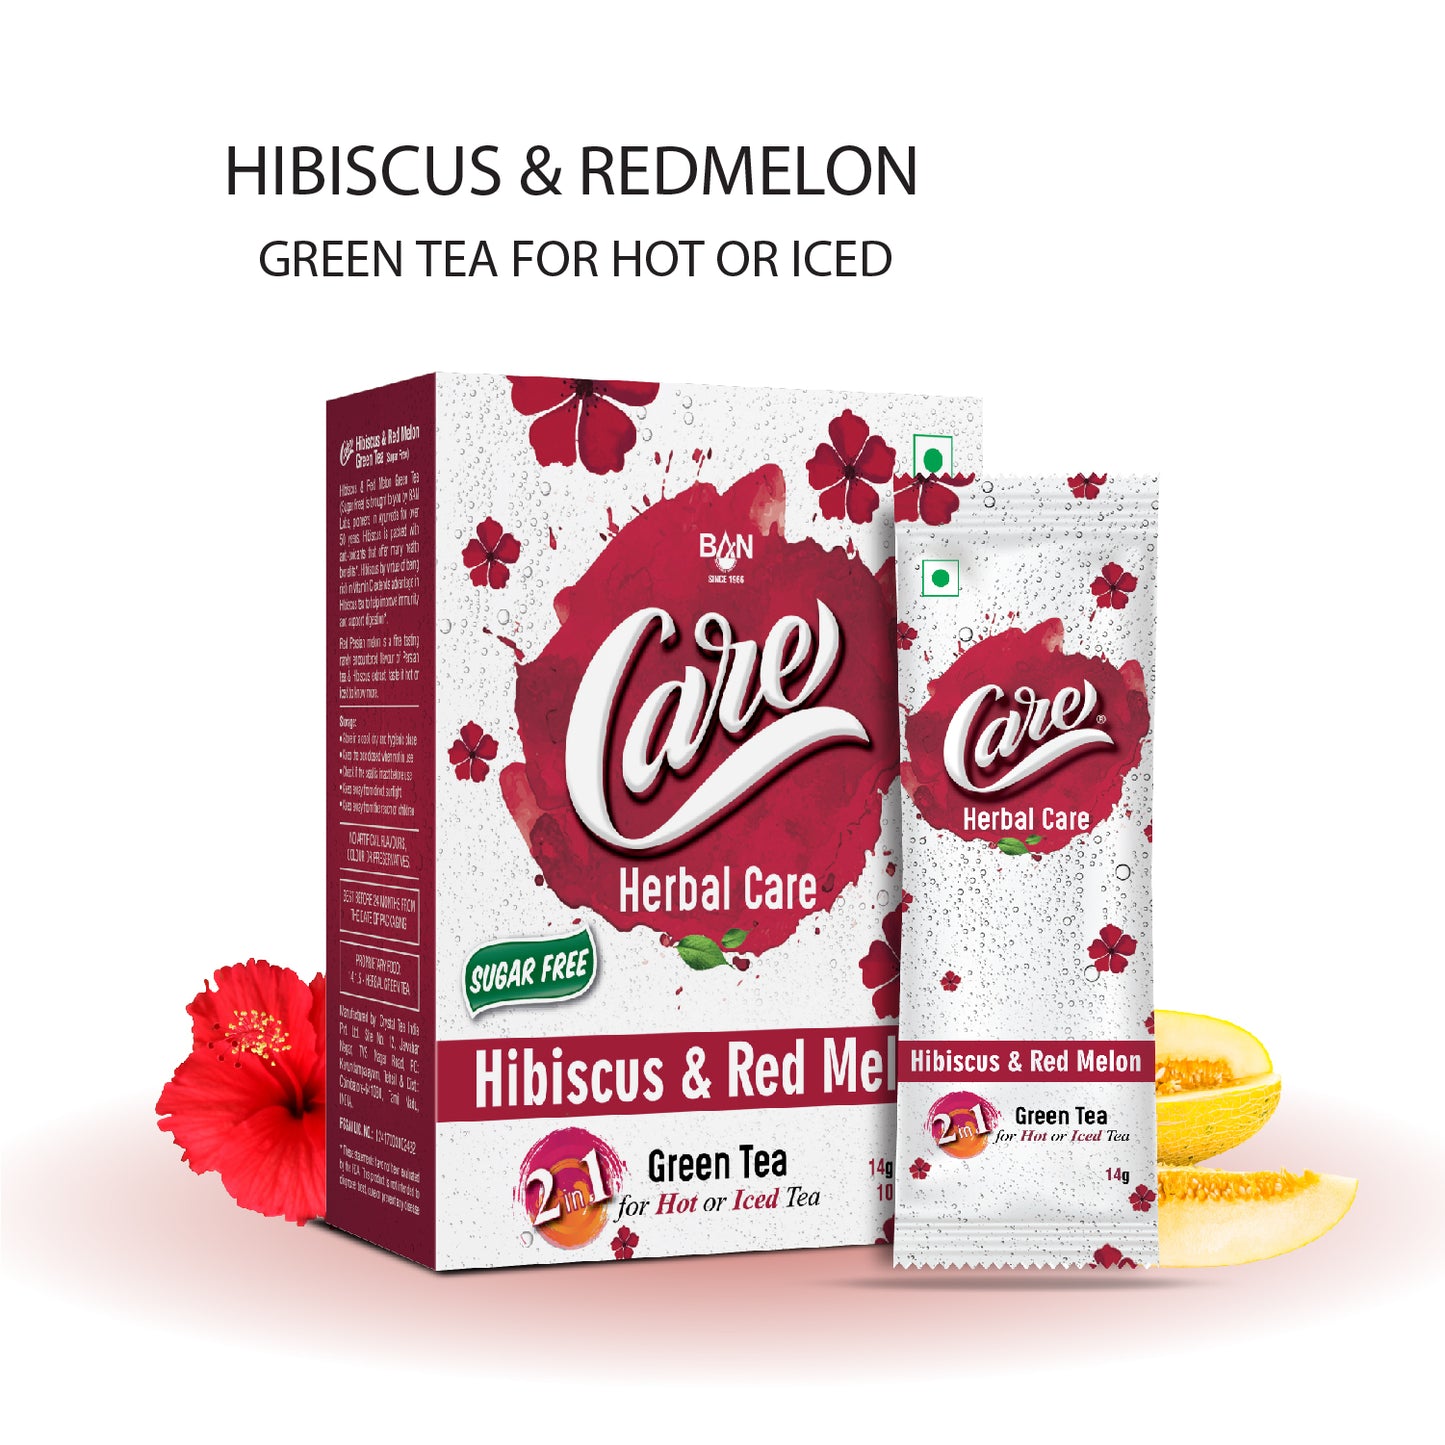 Hibiscus & Red Melon 2 in 1 Green Tea